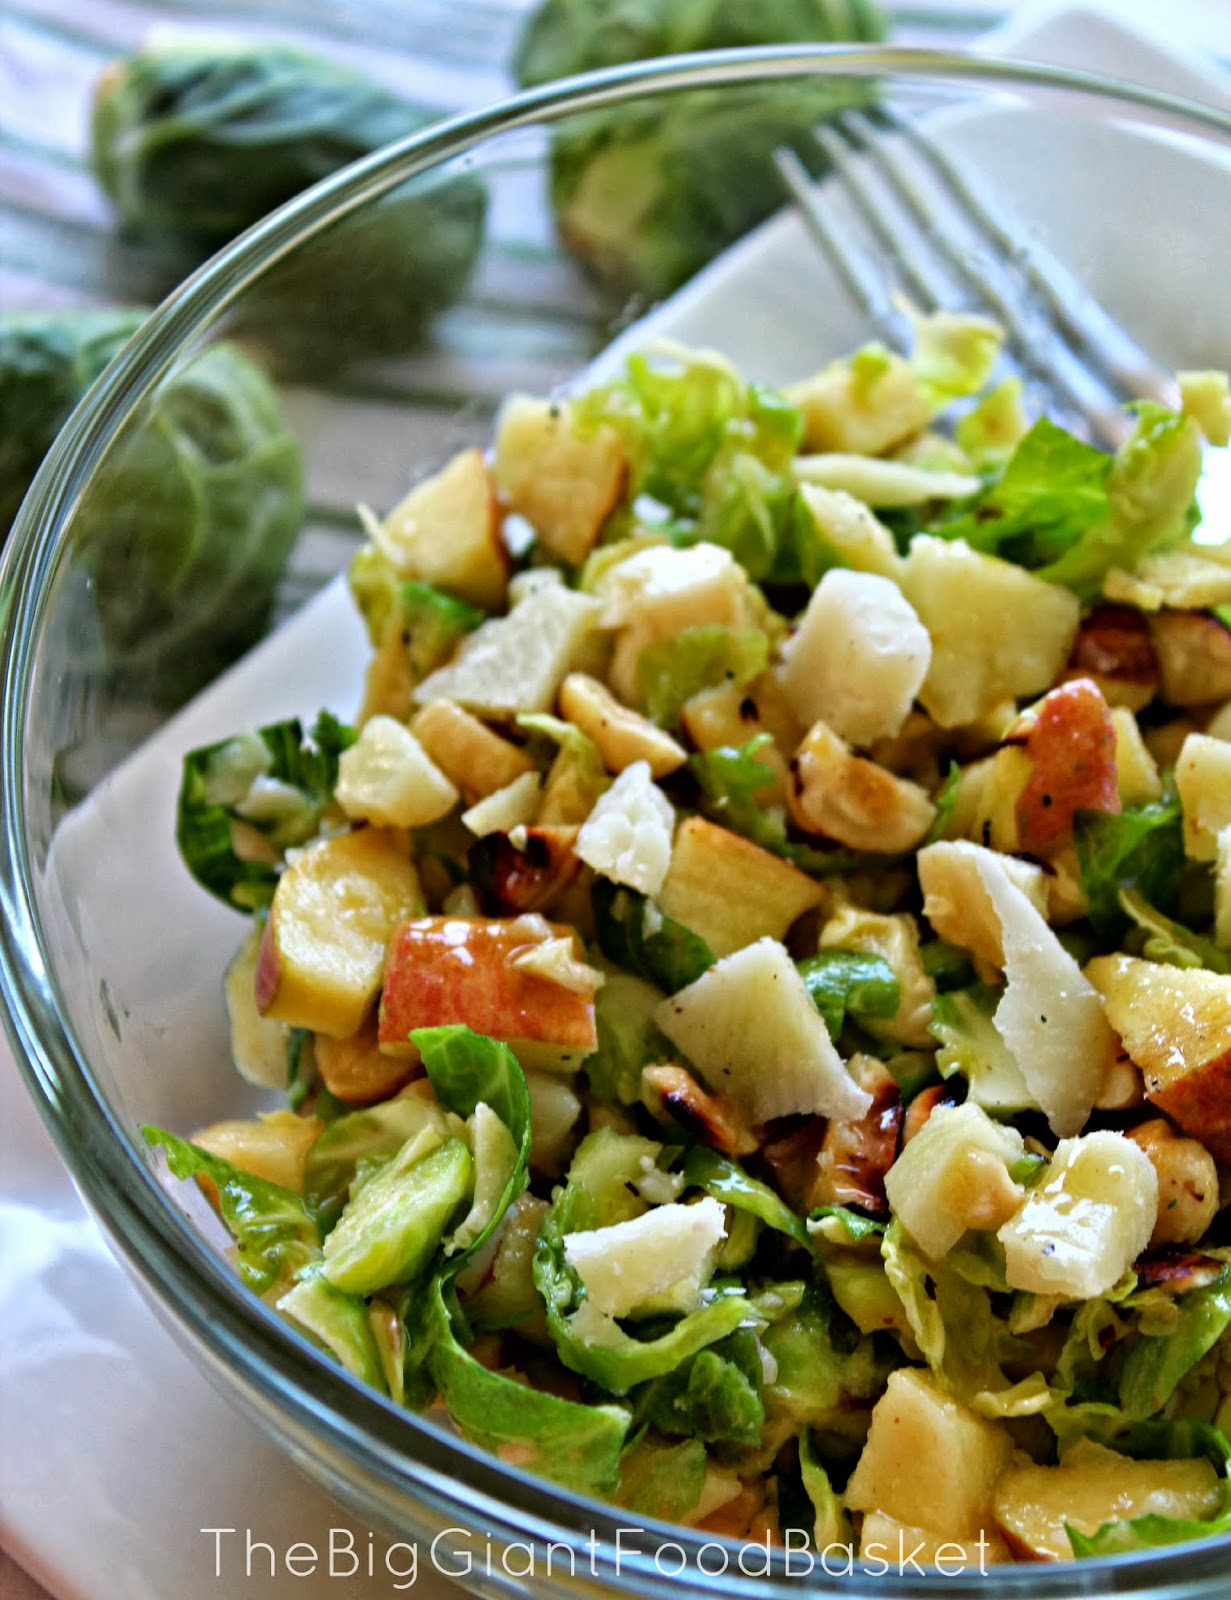 The Big Giant Food Basket: Delicate Brussels Sprouts Salad